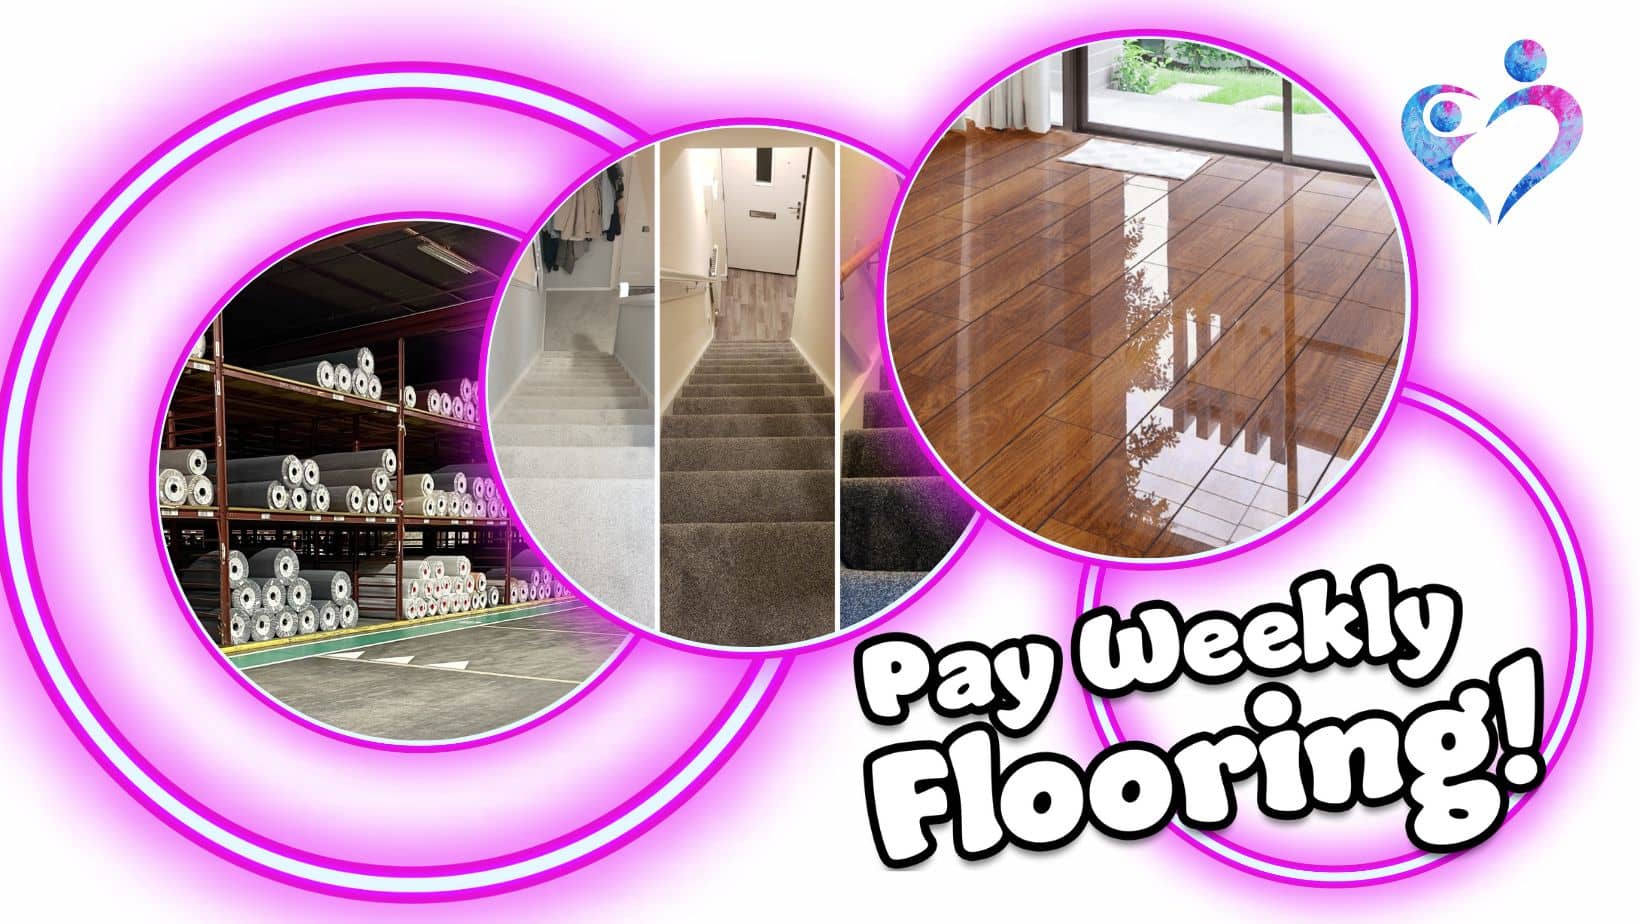 Pay weekly carpets, vinyls and laminate with no credit check from £10 per week apply today 01206 692360